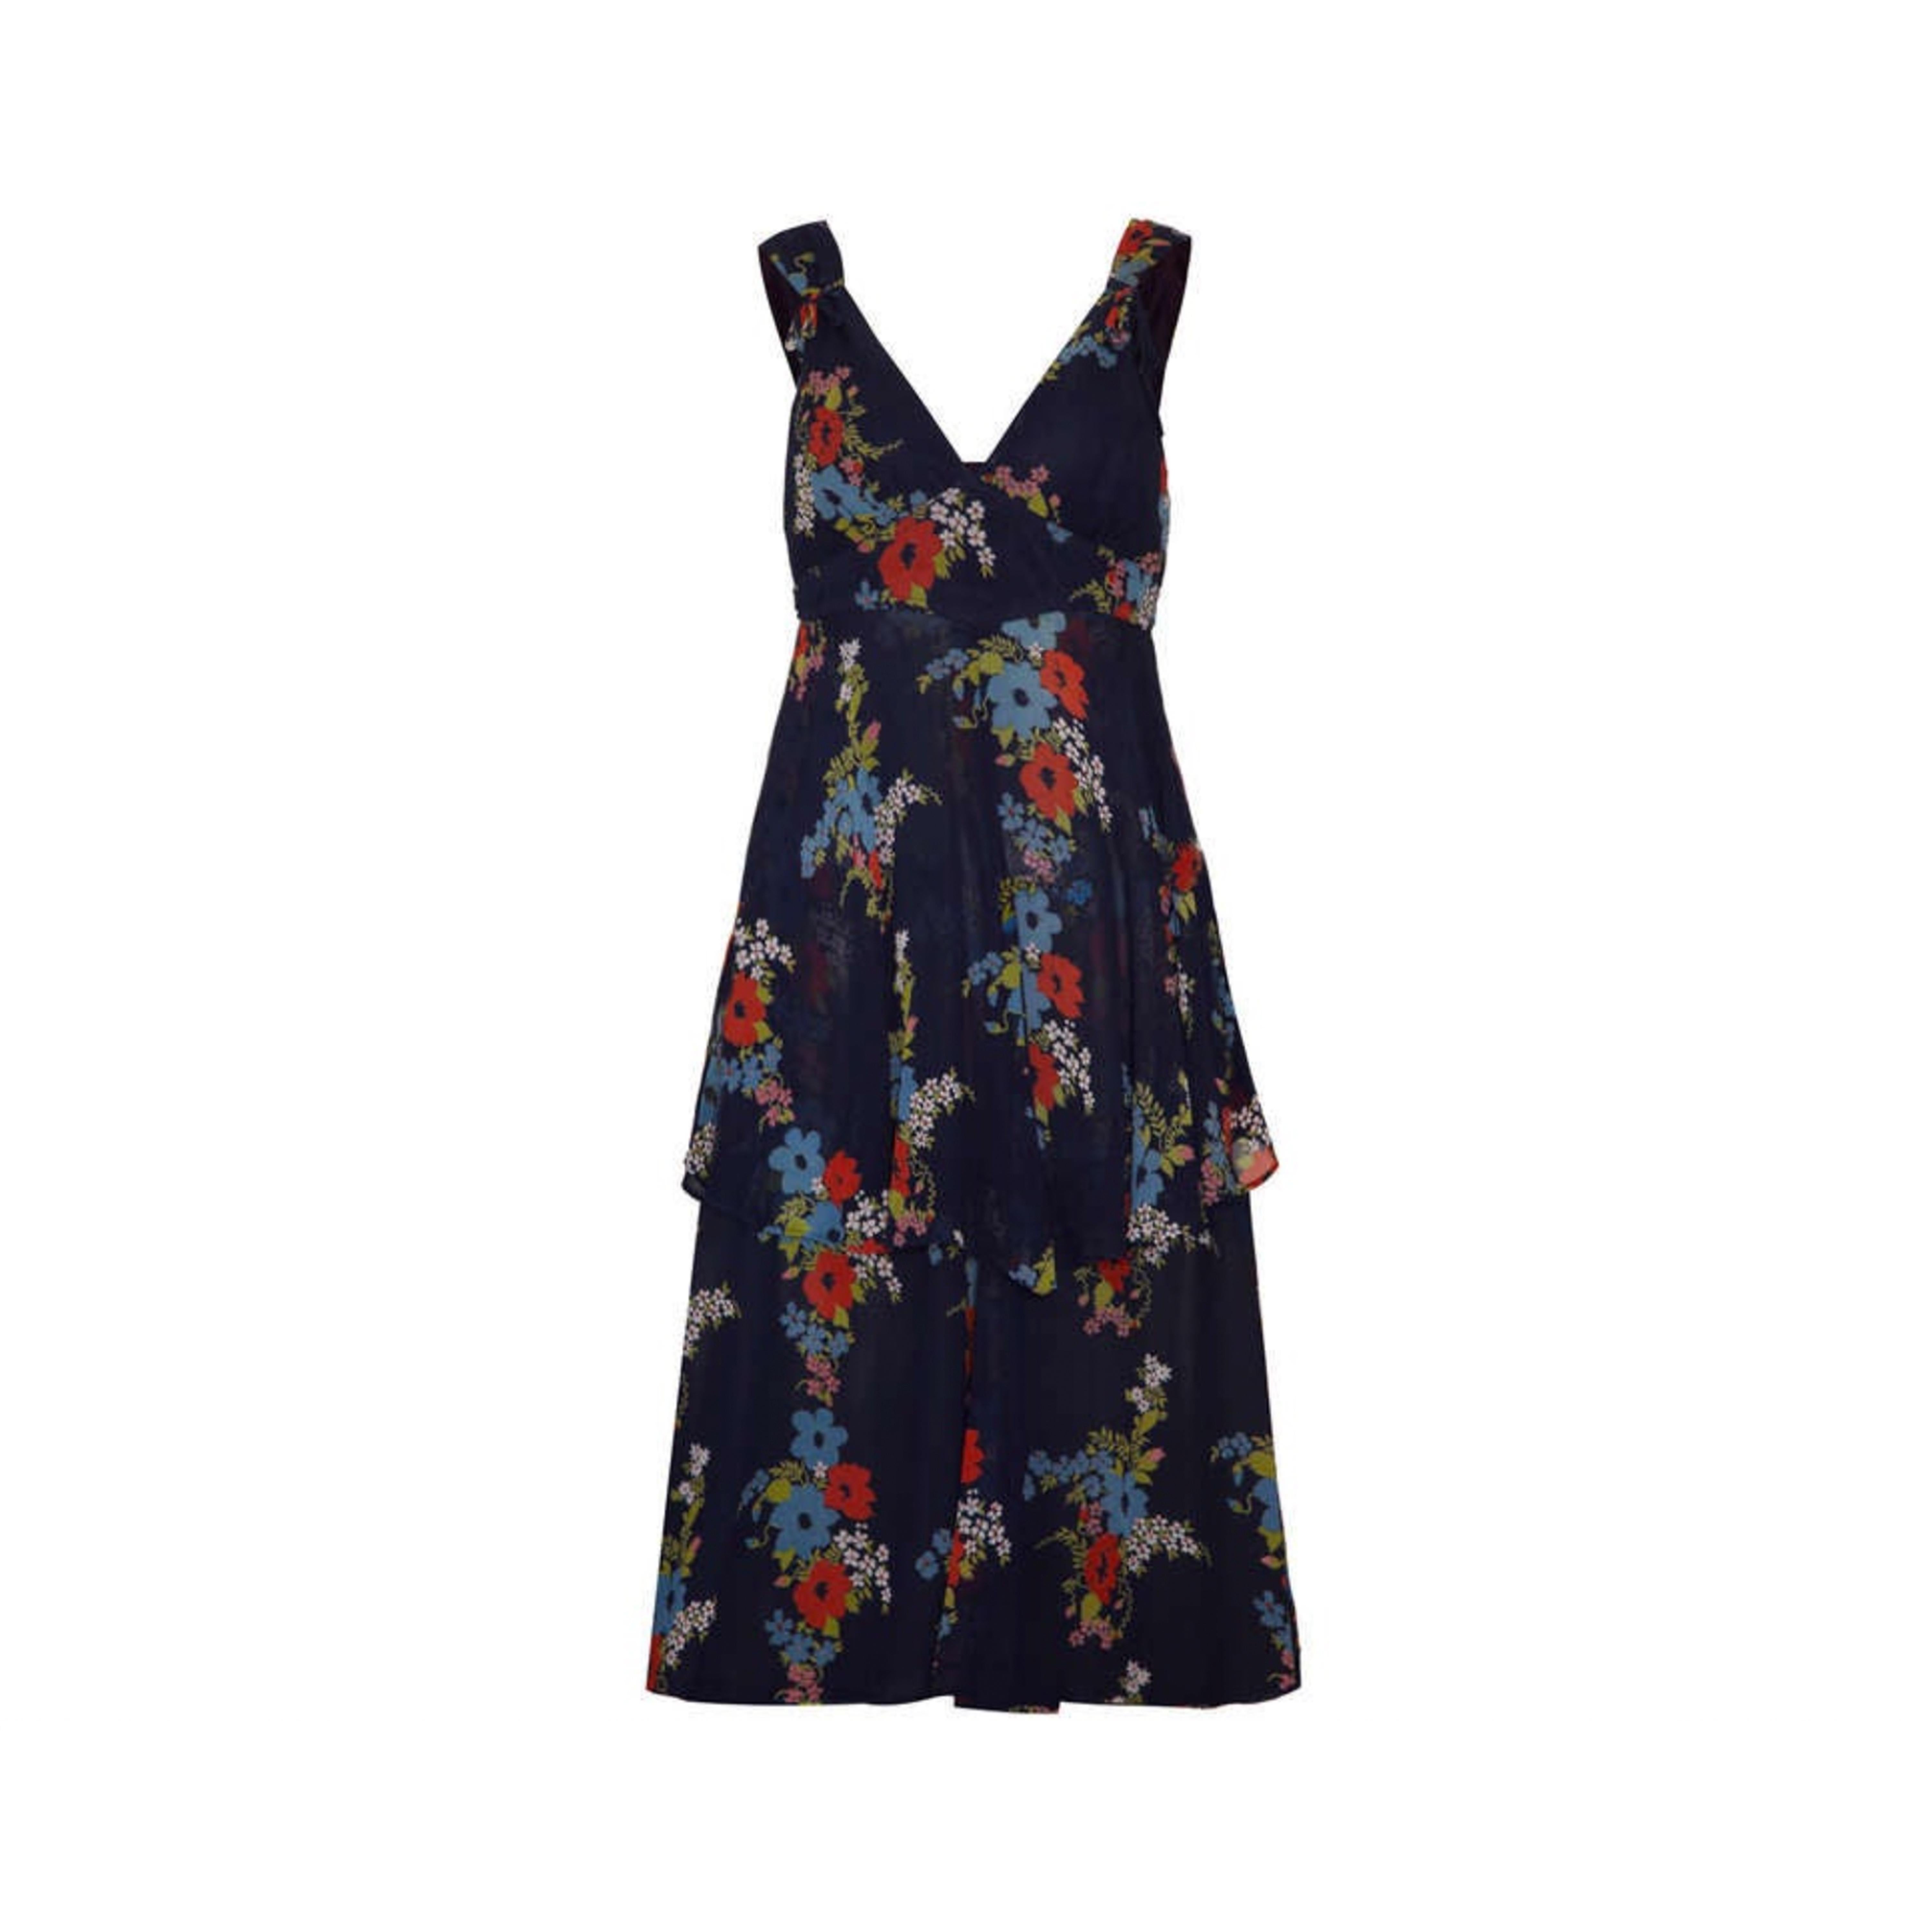 Floaty summer dress from iconic British designer Ossie Clark, for his Radley line. This early to mid 1970’s piece features a pretty floral print in two layers of navy chiffon in a red, sky blue, green & white floral print by his wife and business